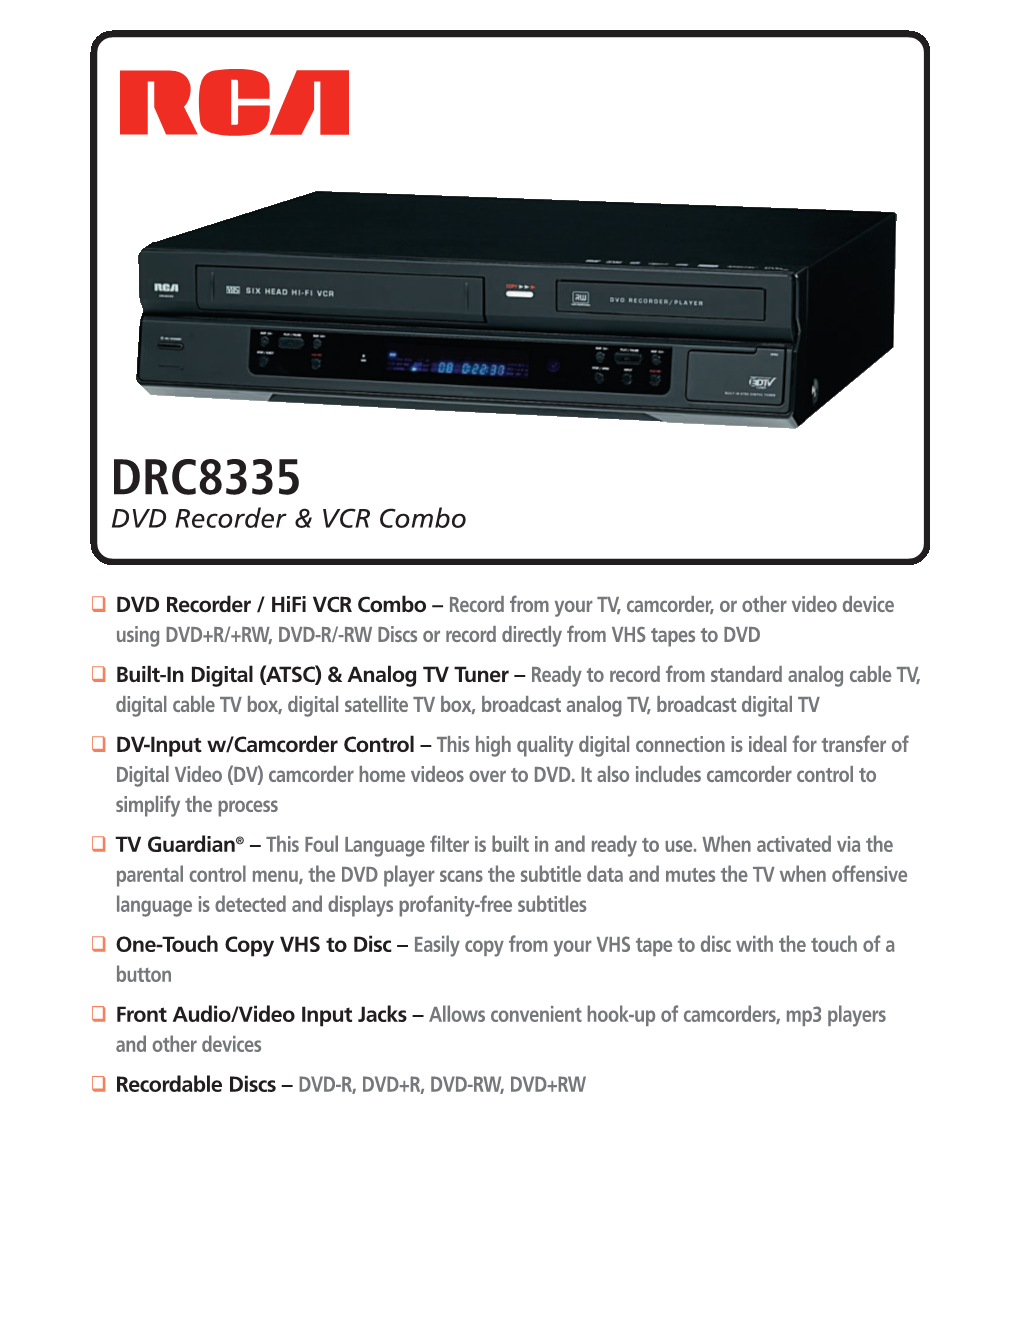 DRC8335 DVD Recorder & VCR Combo